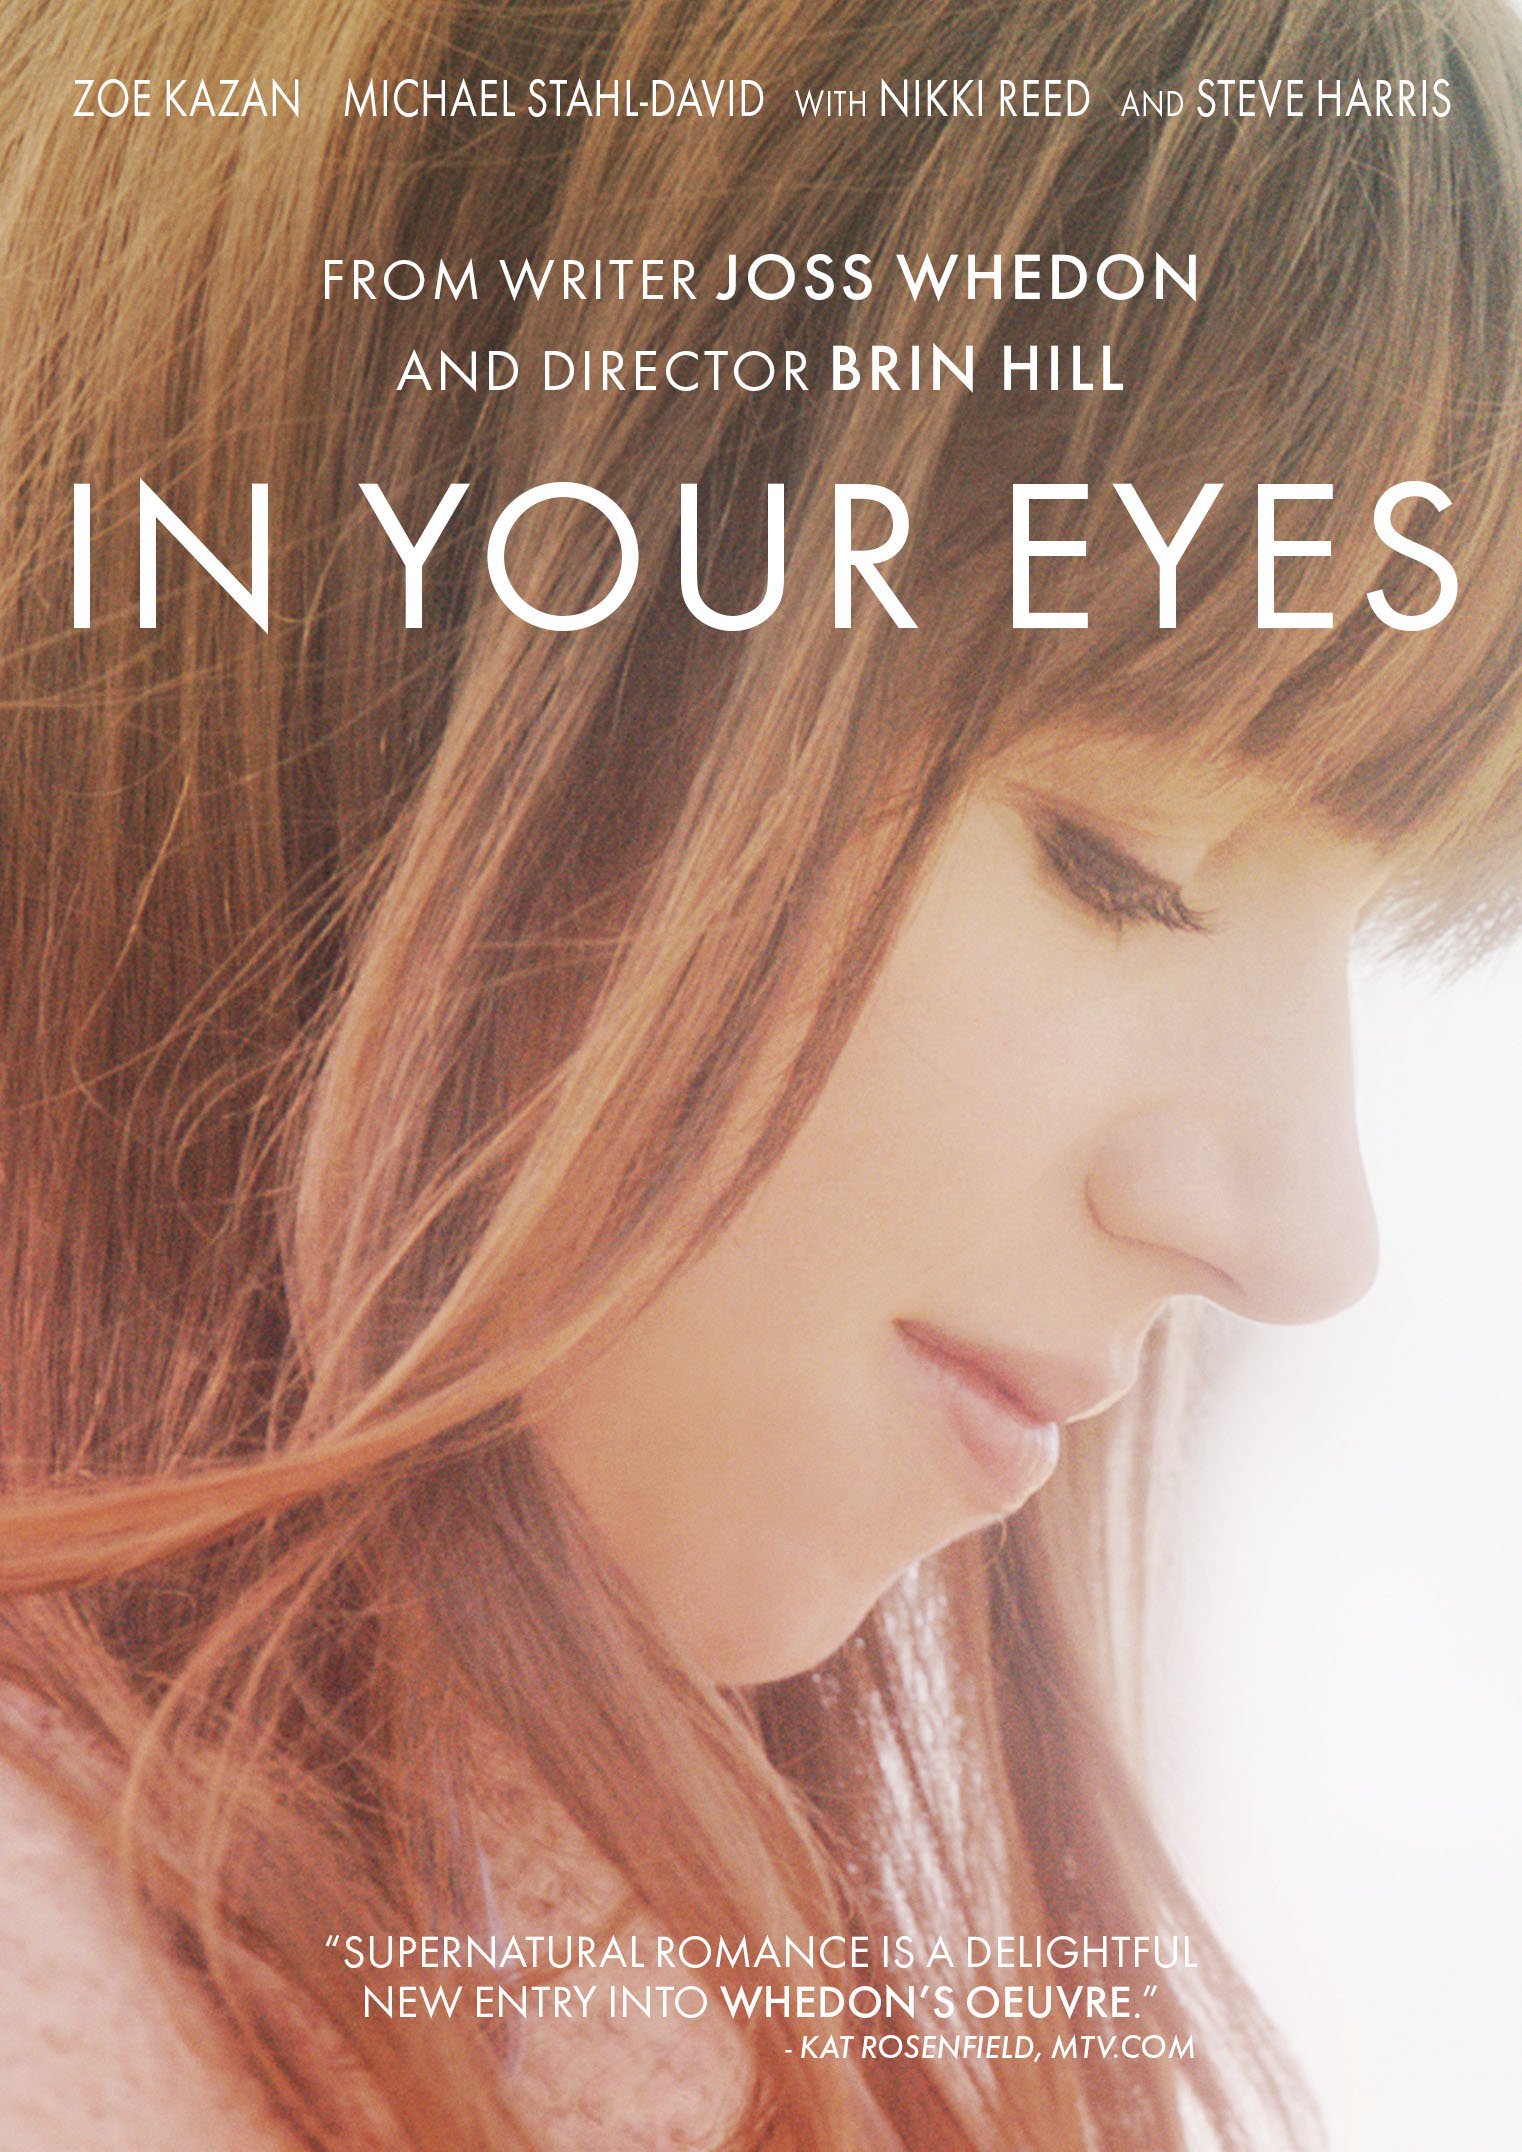 In Your Eyes DVD Release Date February 10, 2015